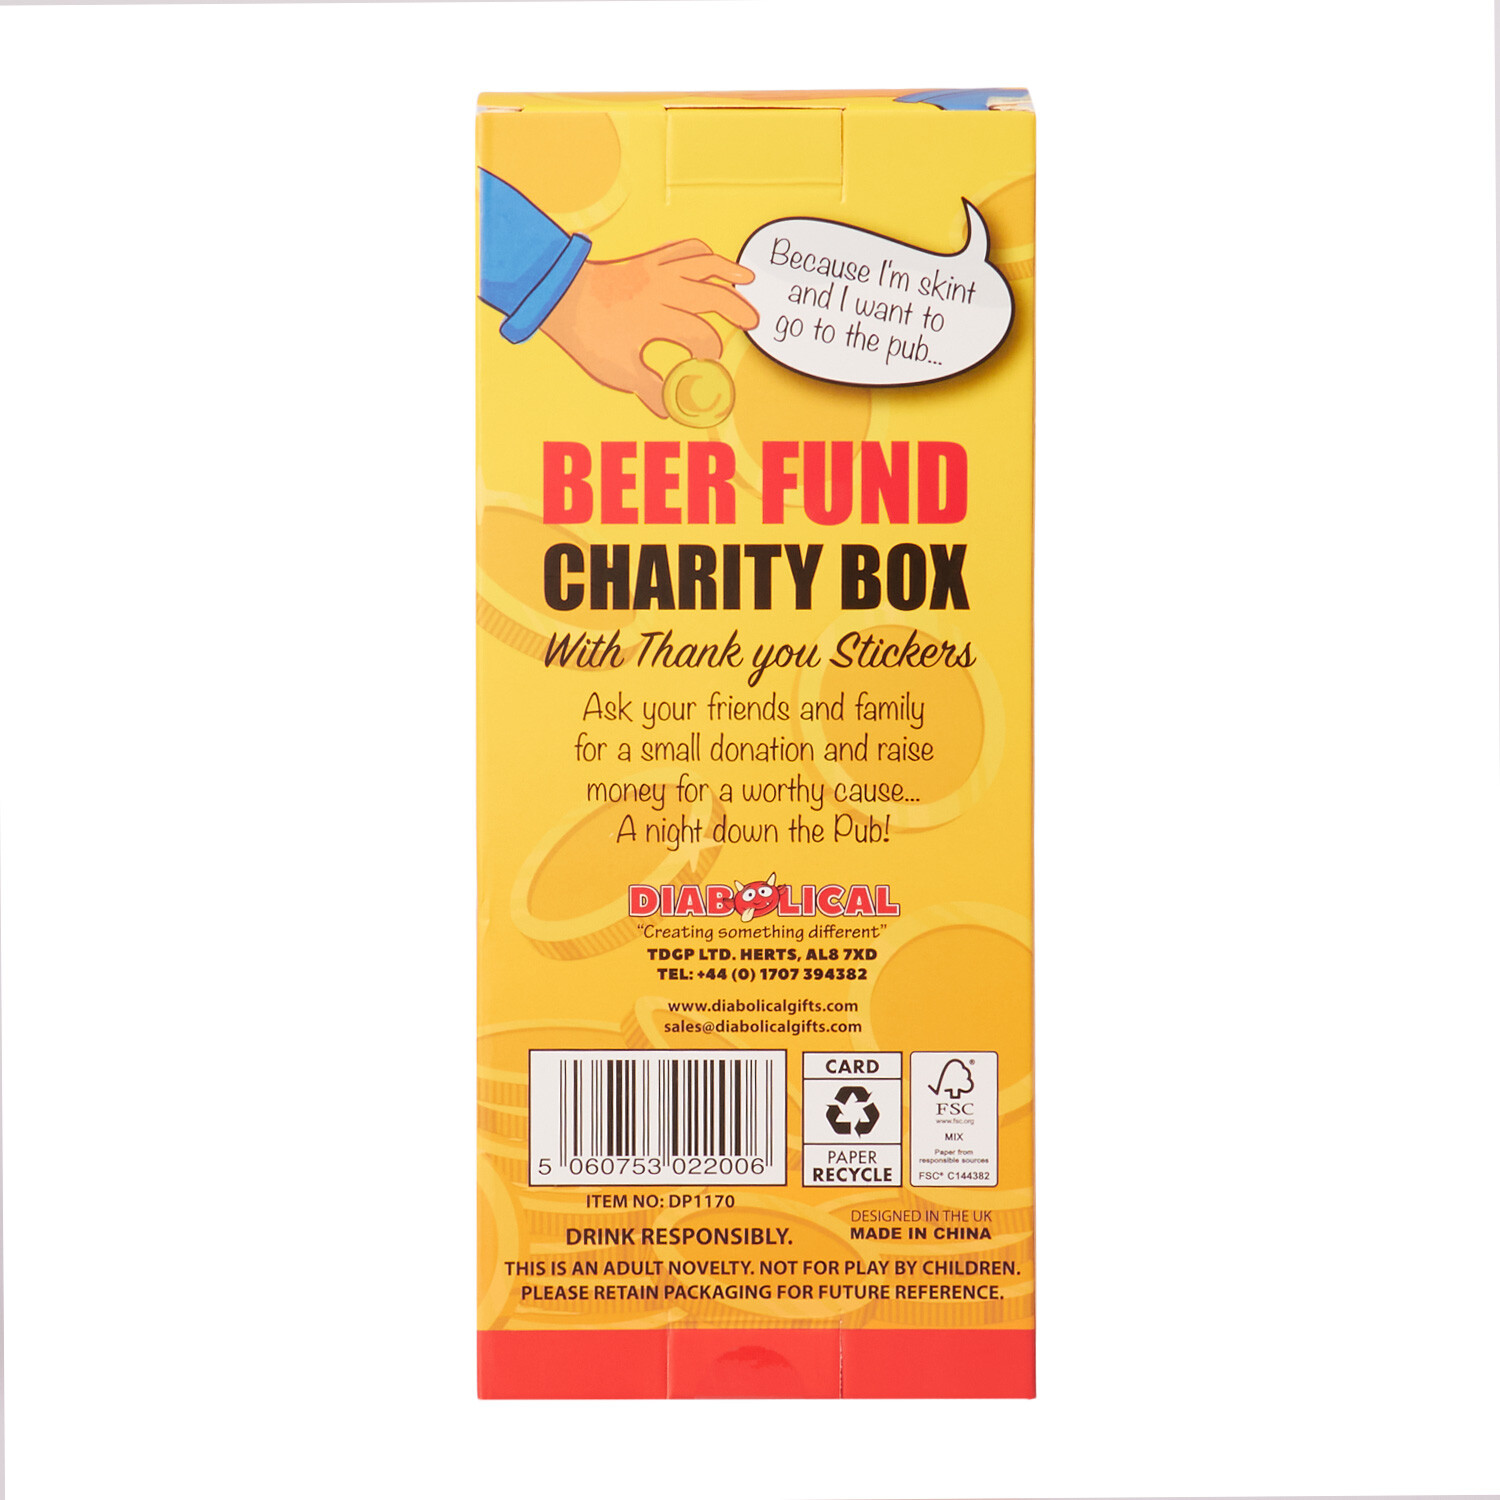 G&G Beer Fund Charity Box Image 3